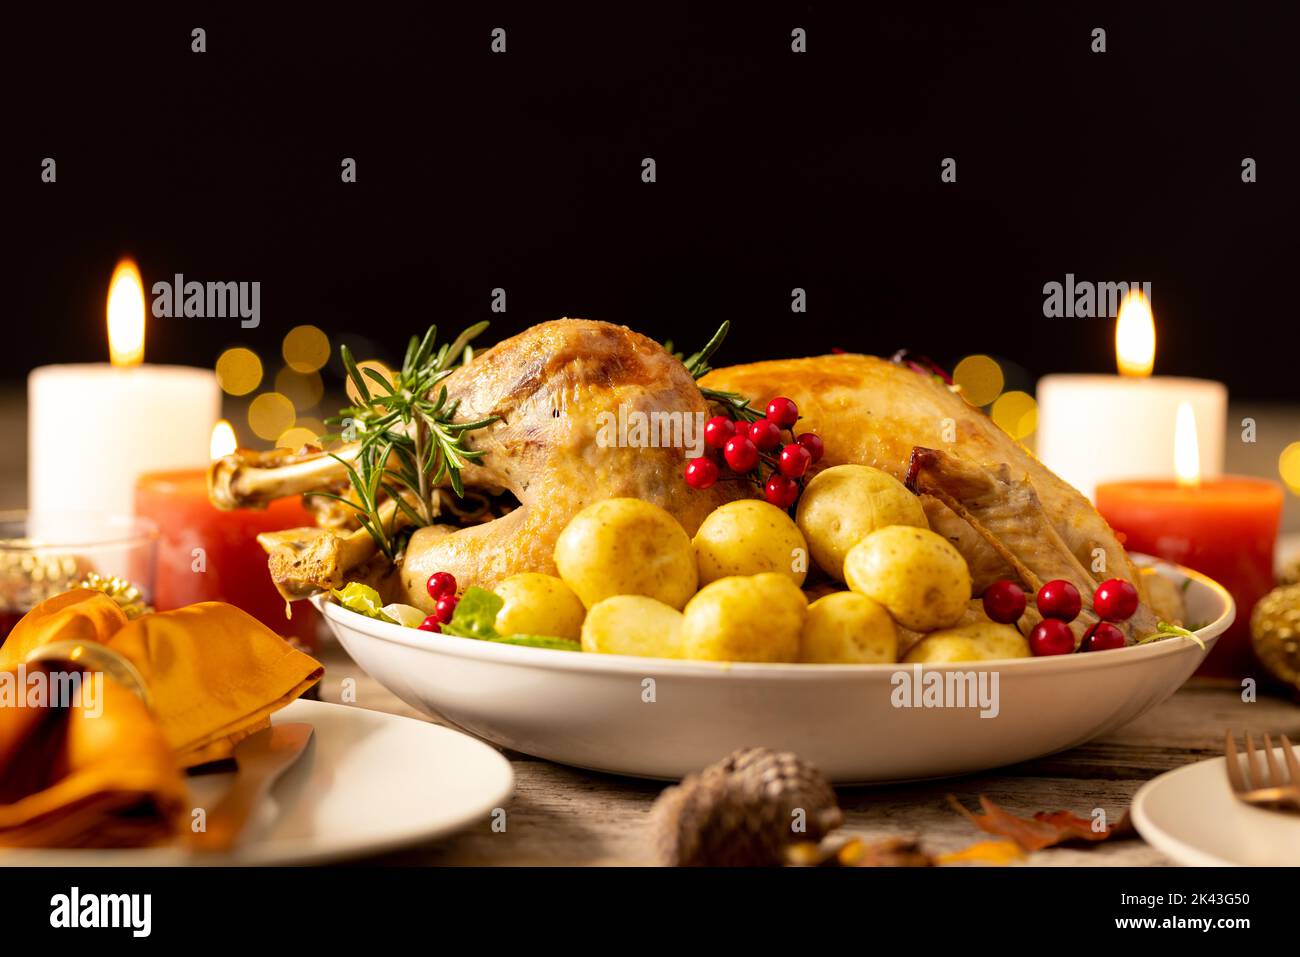 Thanksgiving table with roast turkey, potatoes, candles and autumn decoration Stock Photo